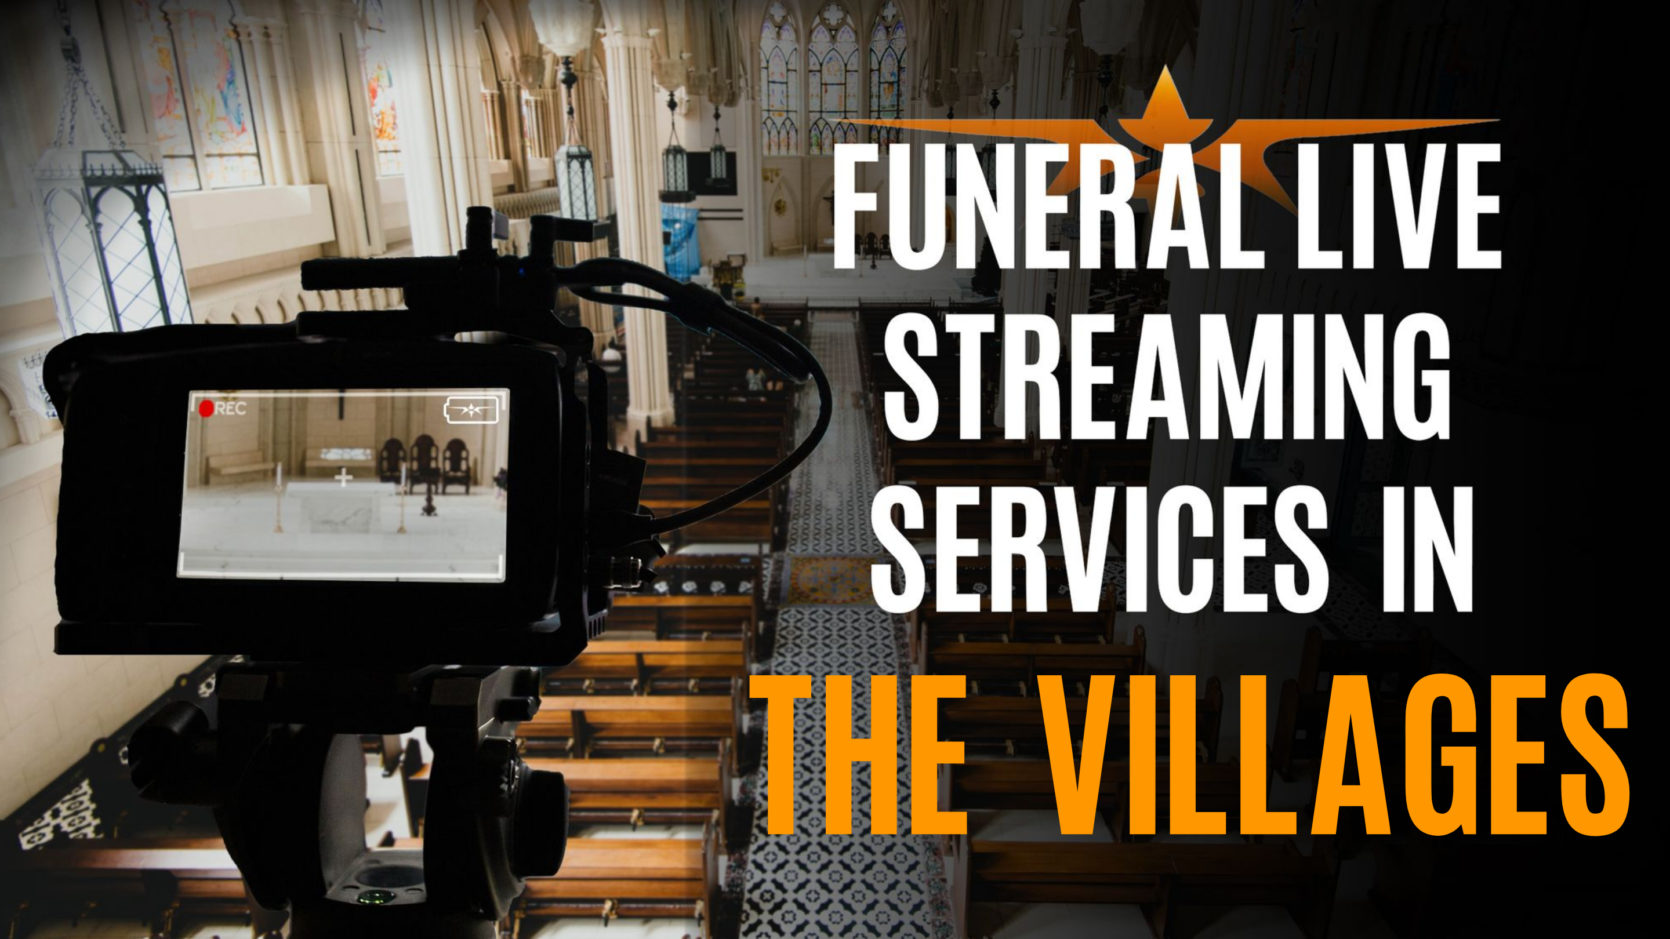 Funeral Live Streaming Services in The Villages